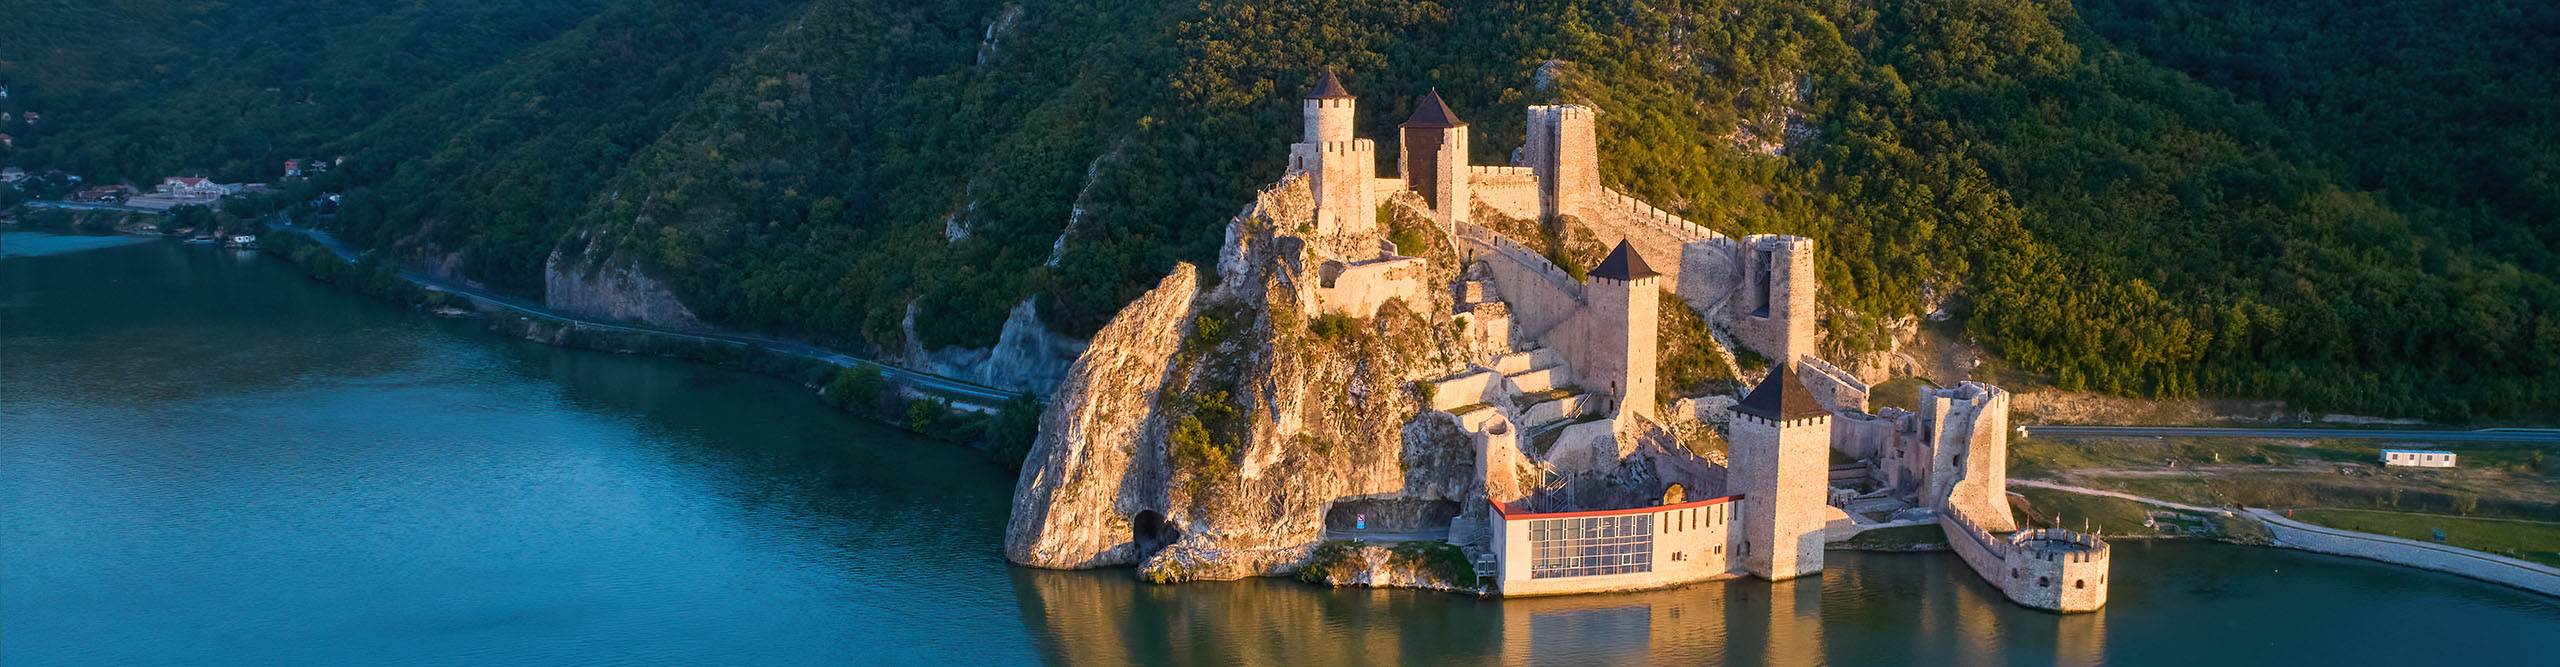 Aerial view of medieval fortress of Golubac, mirroring in the waters of the Danube lake, Serbia.